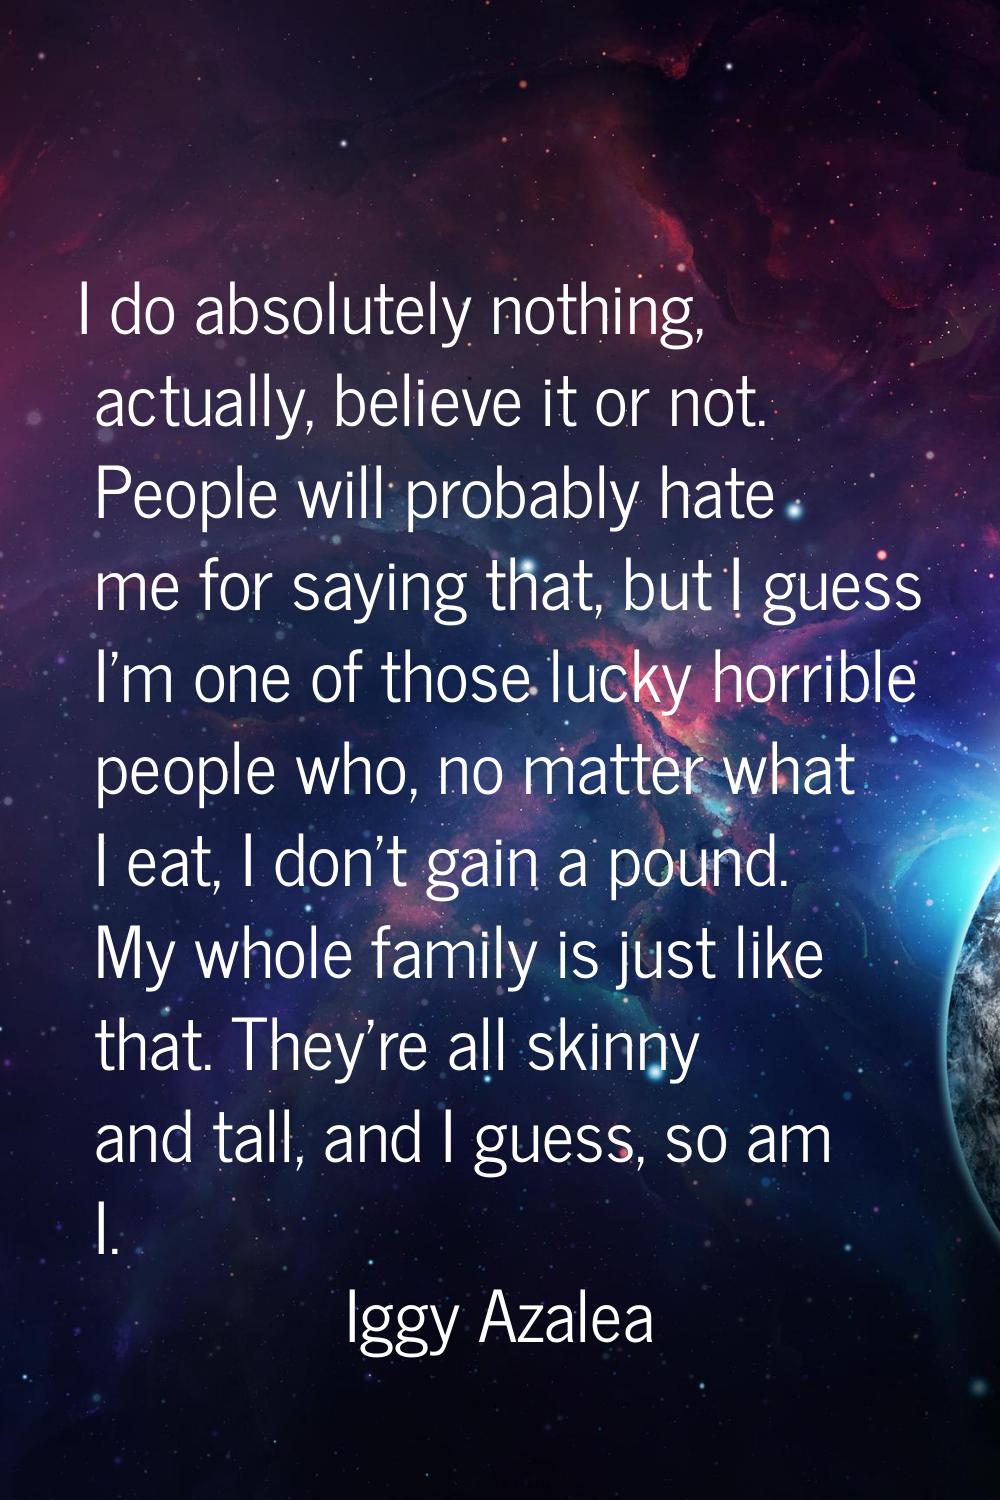 I do absolutely nothing, actually, believe it or not. People will probably hate me for saying that,